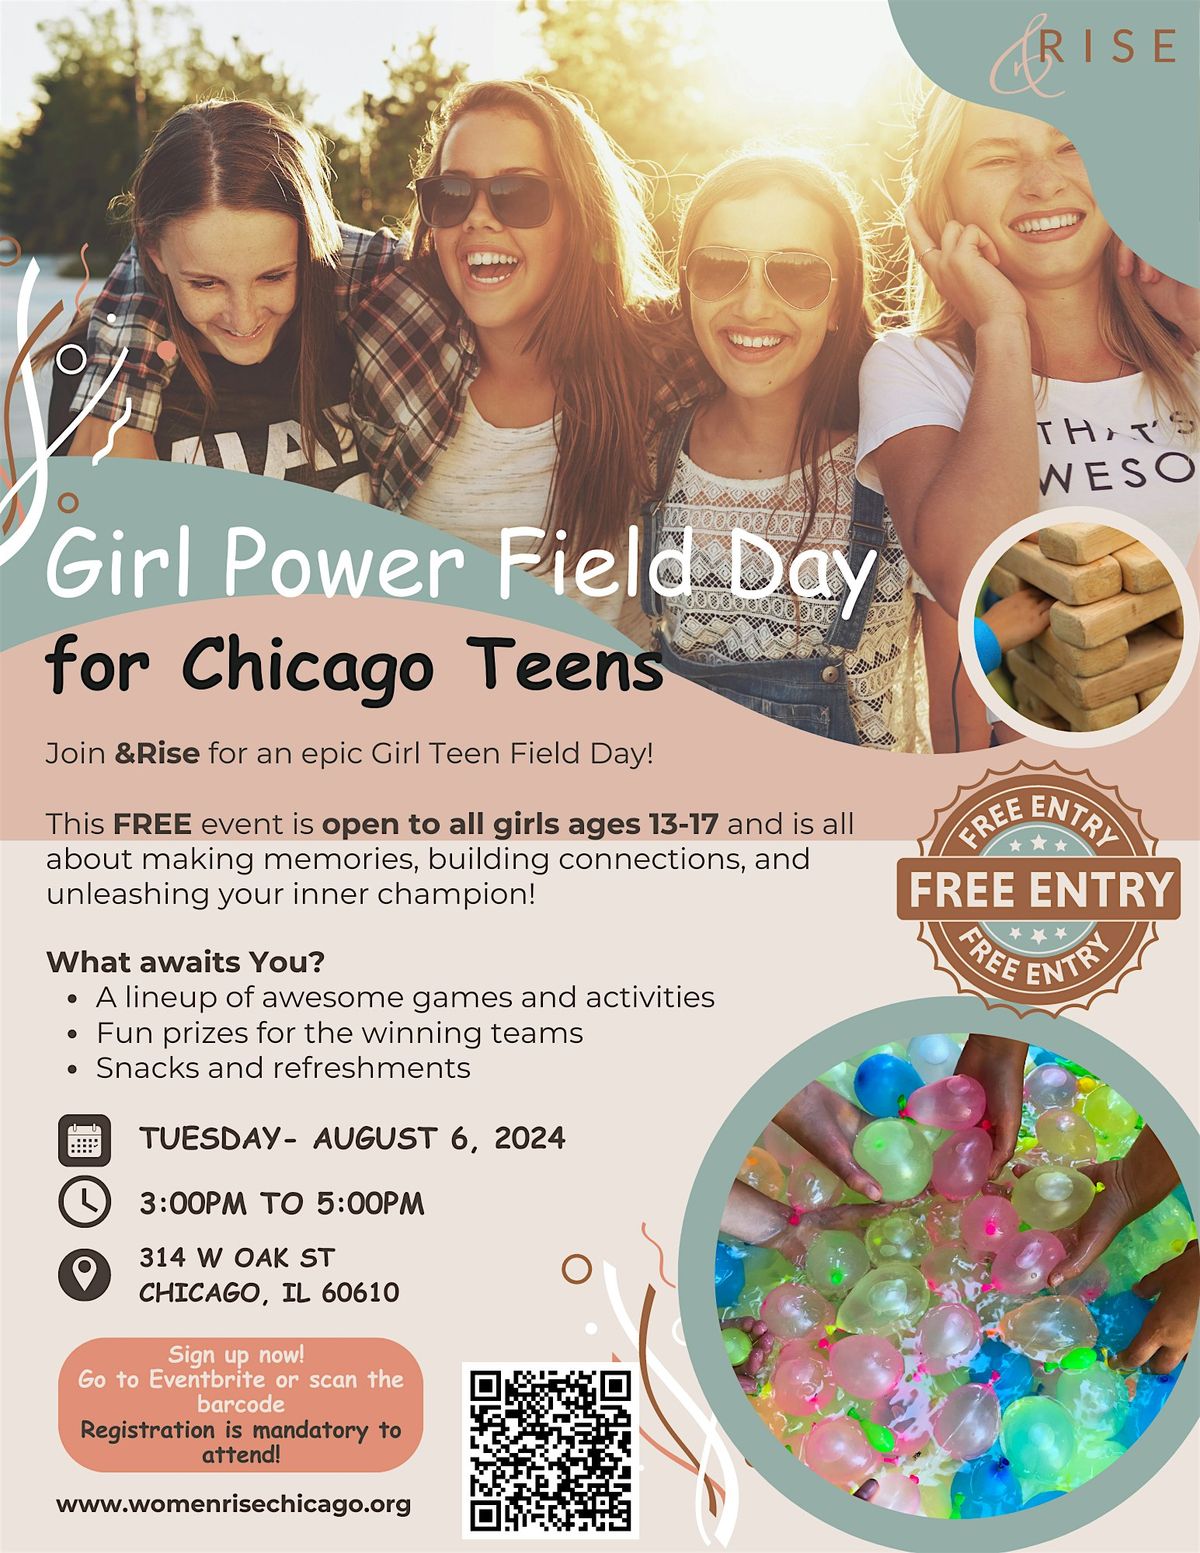 Girl Power Field Day for Chicago Teens